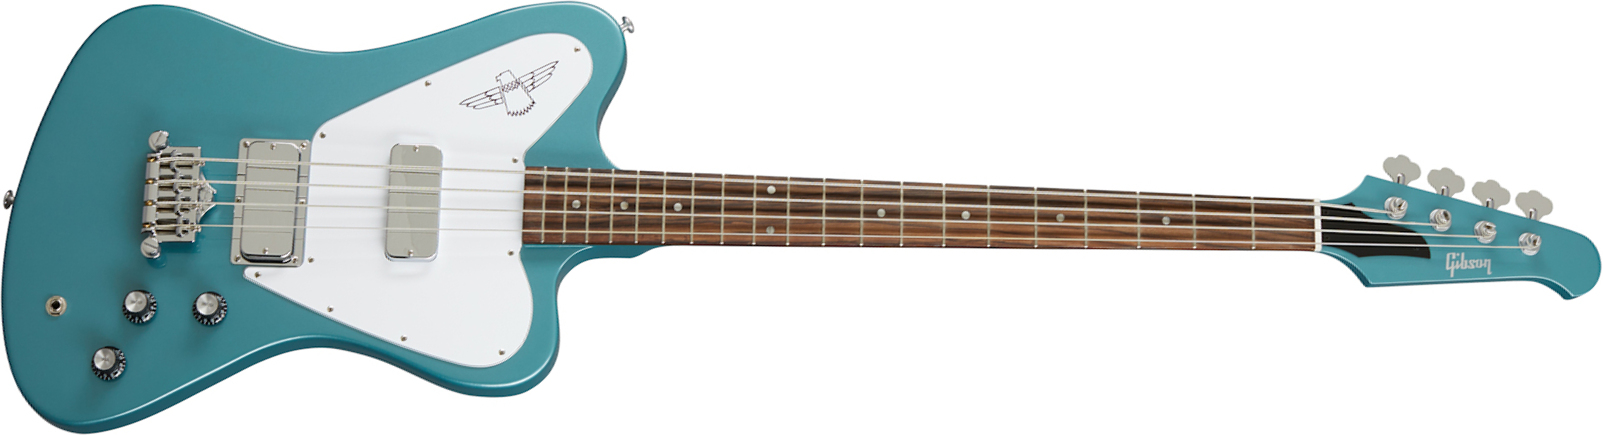 Gibson Non-reverse Thunderbird Modern Rw - Faded Pelham Blue - Basse Électrique Solid Body - Main picture